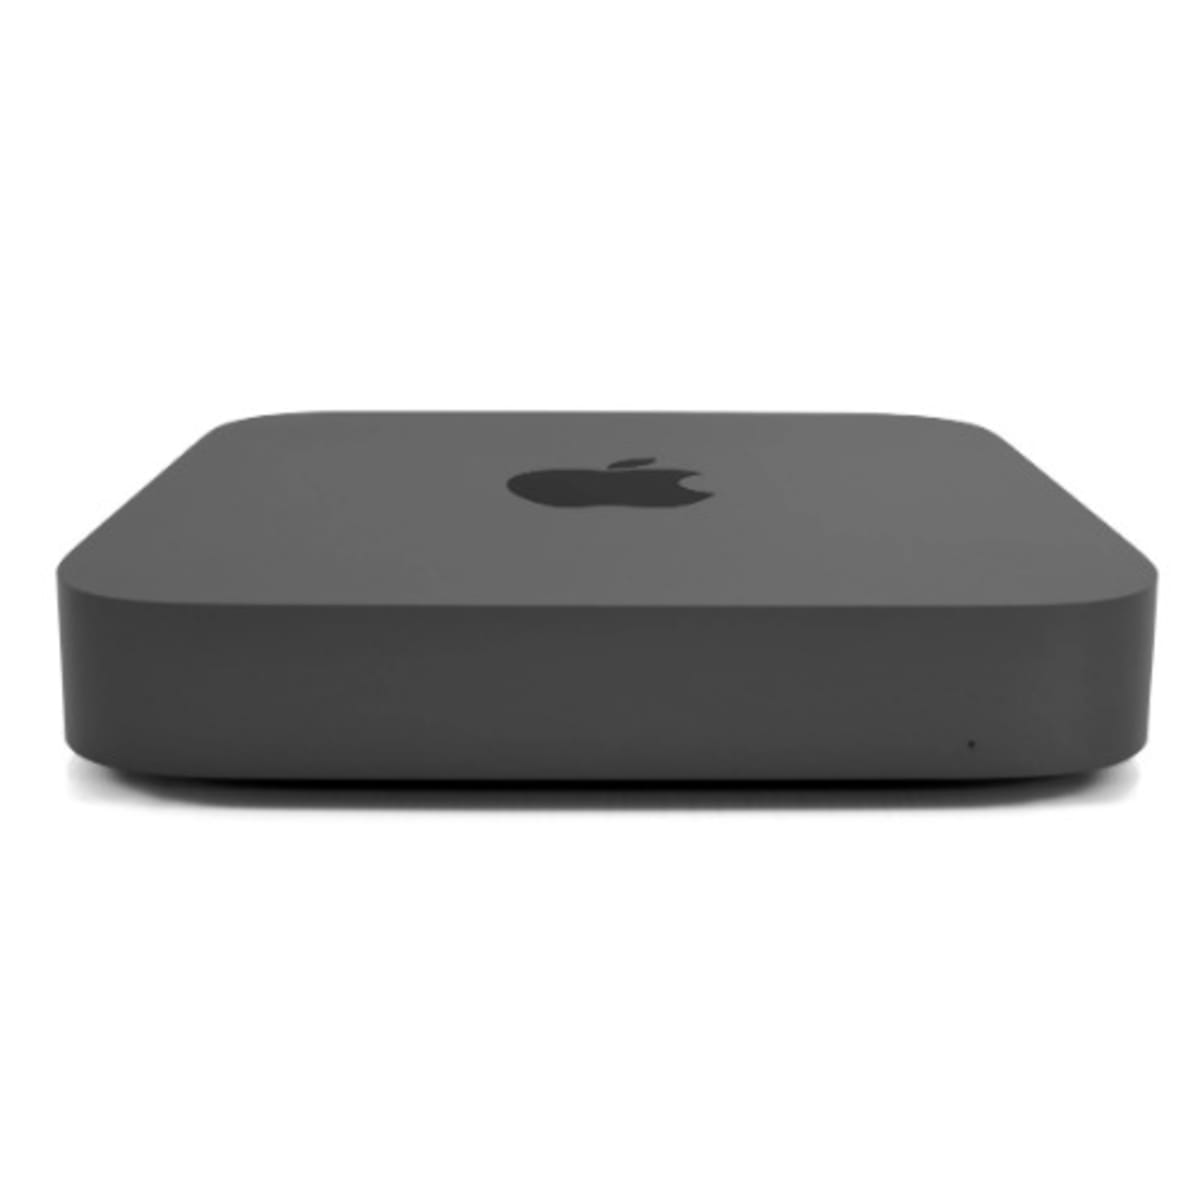 The Mac mini is in danger of becoming the next Apple product to